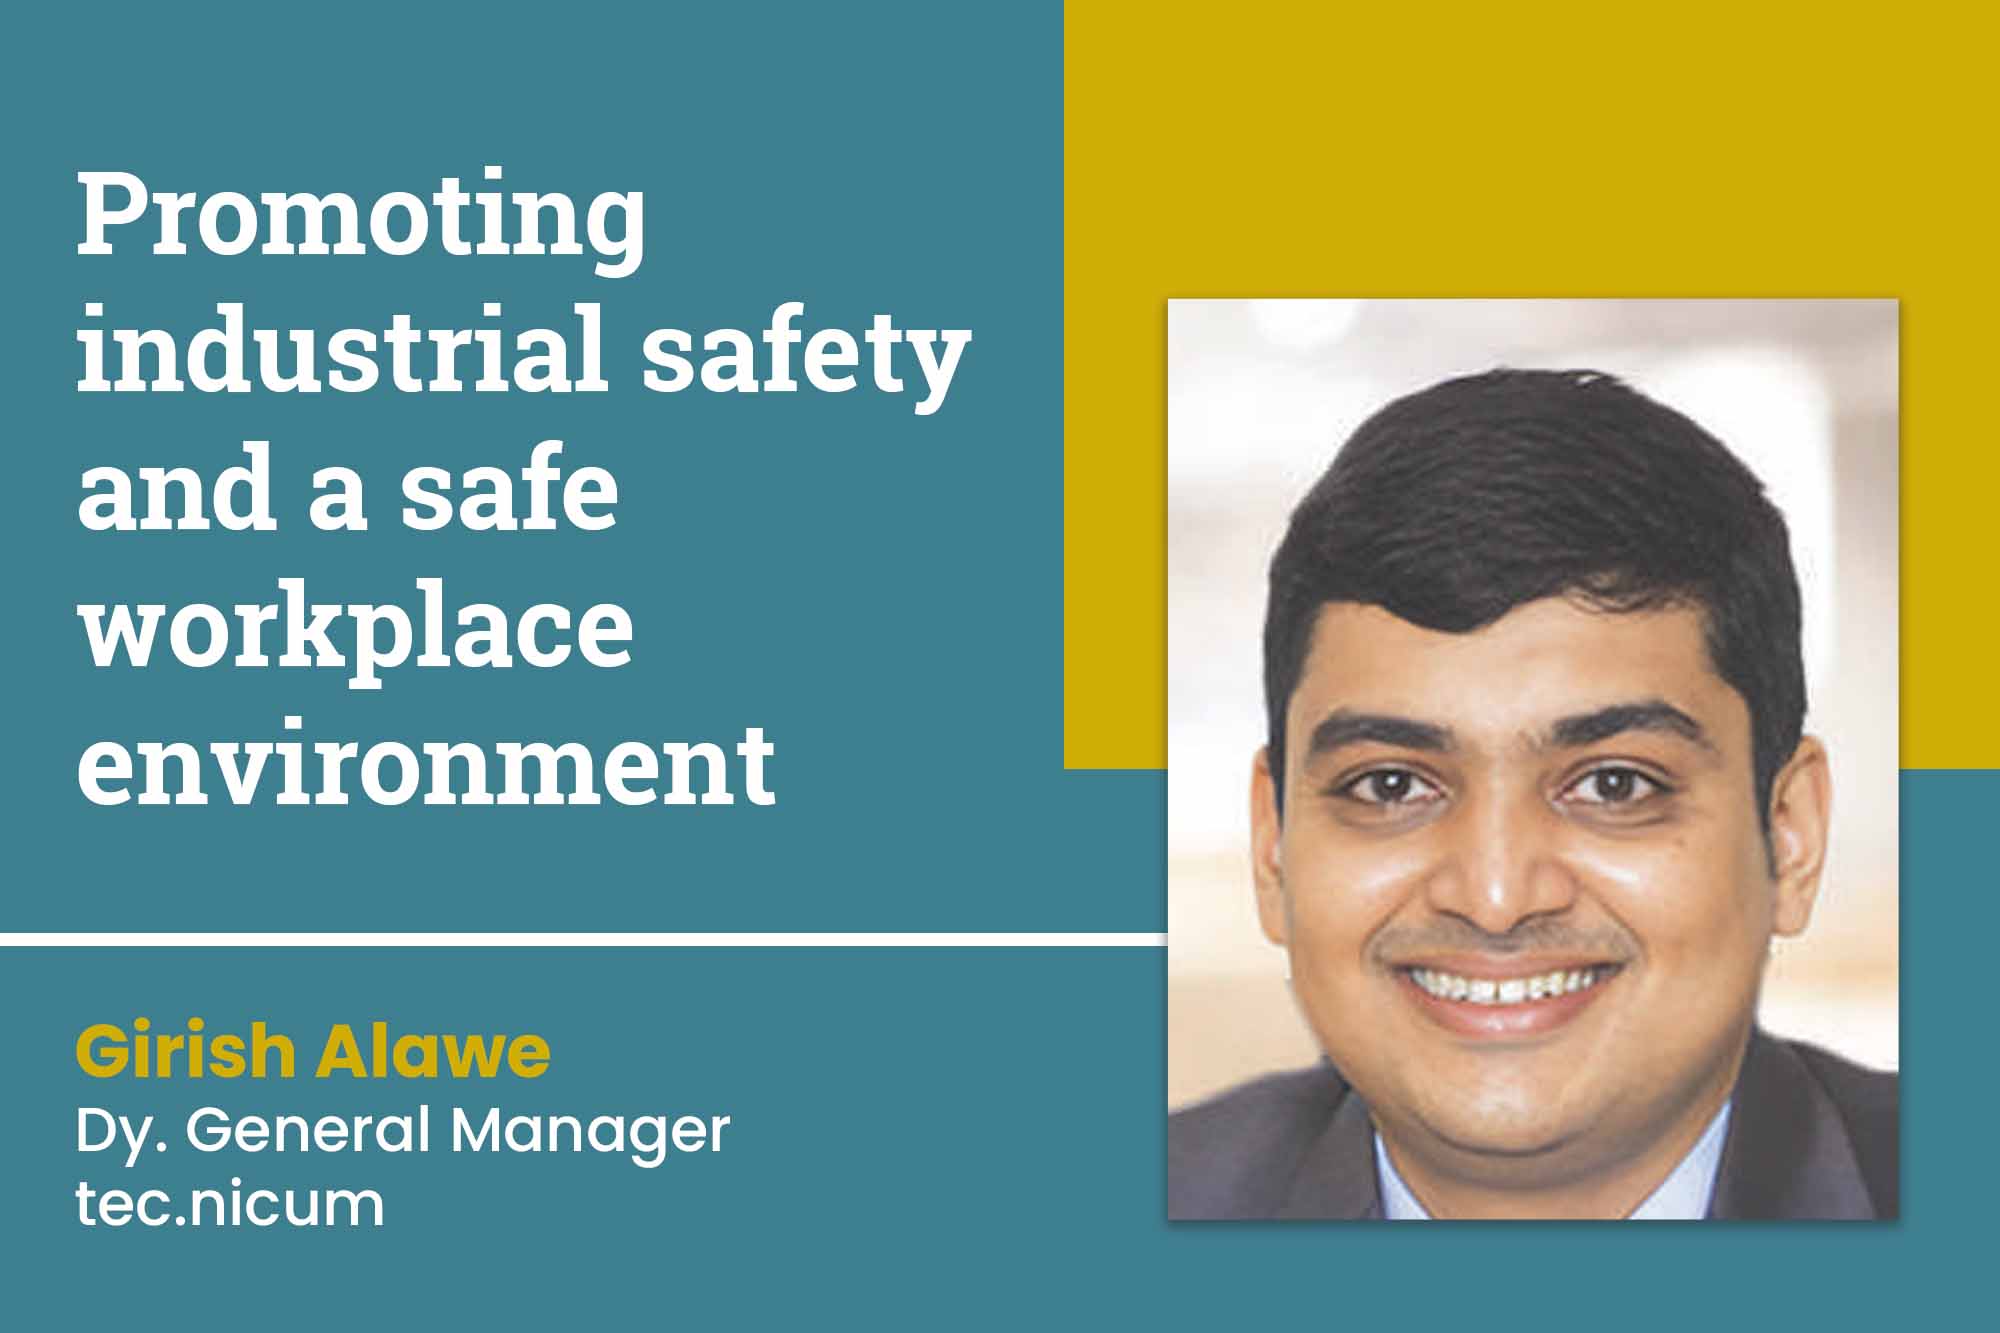 Promoting industrial safety and a safe workplace environment